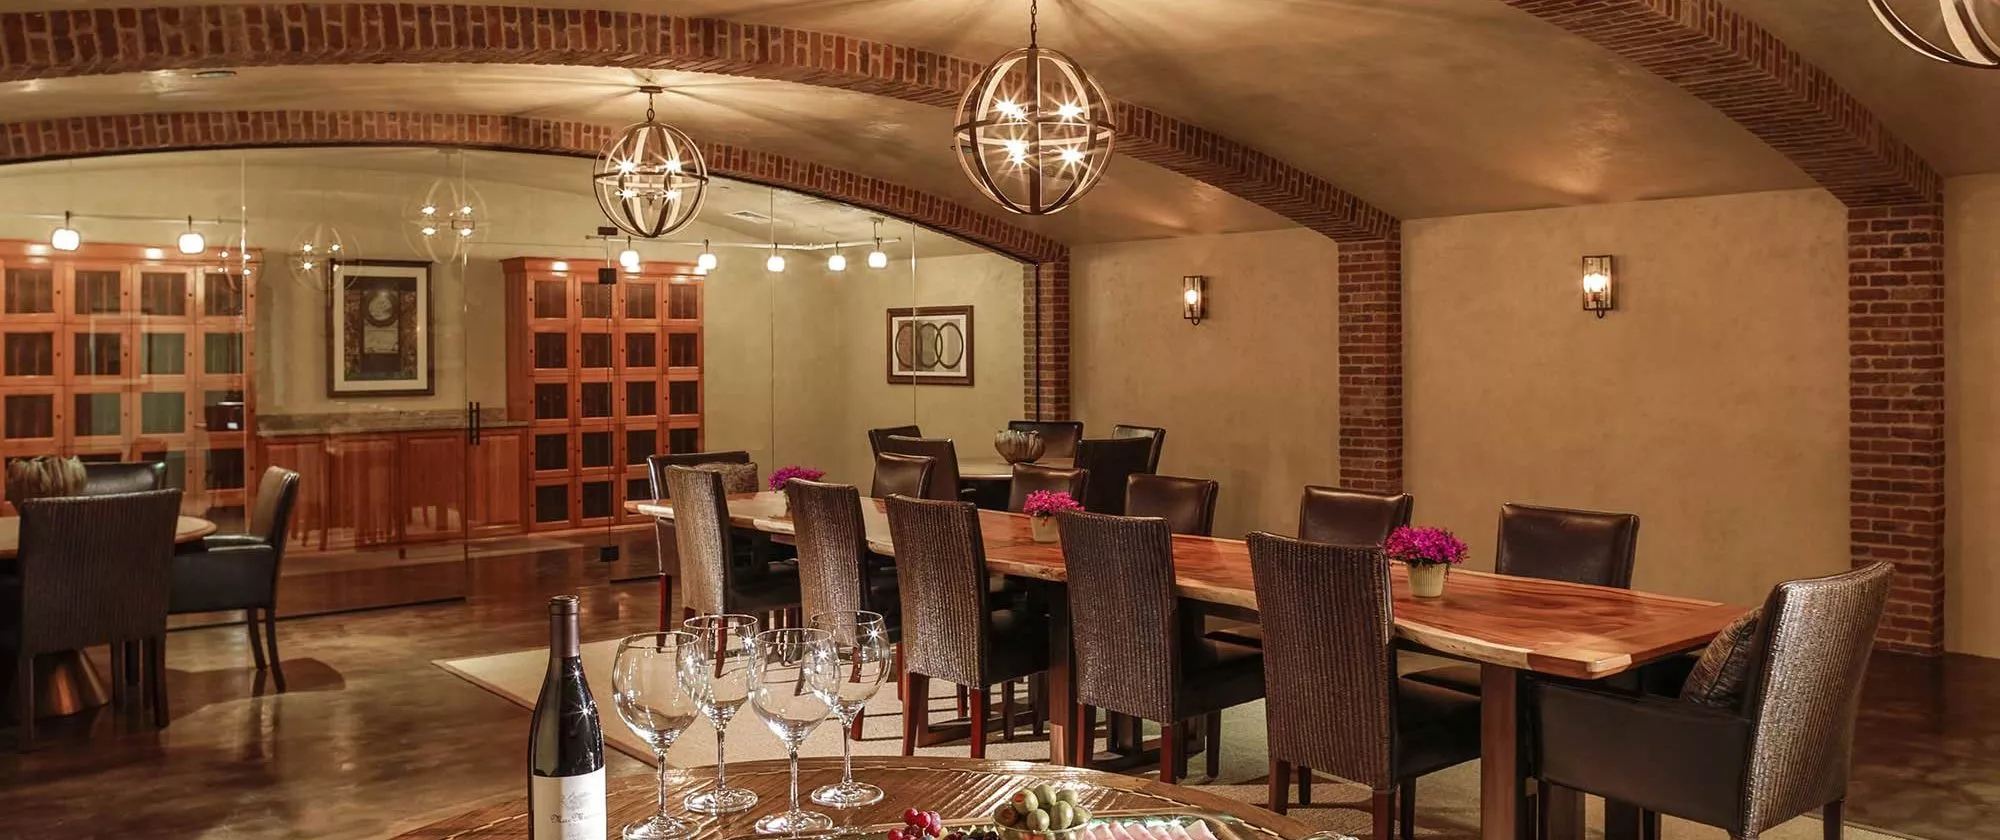 Fountaingrove Lodge private dining room with charcuterie board and wine glasses